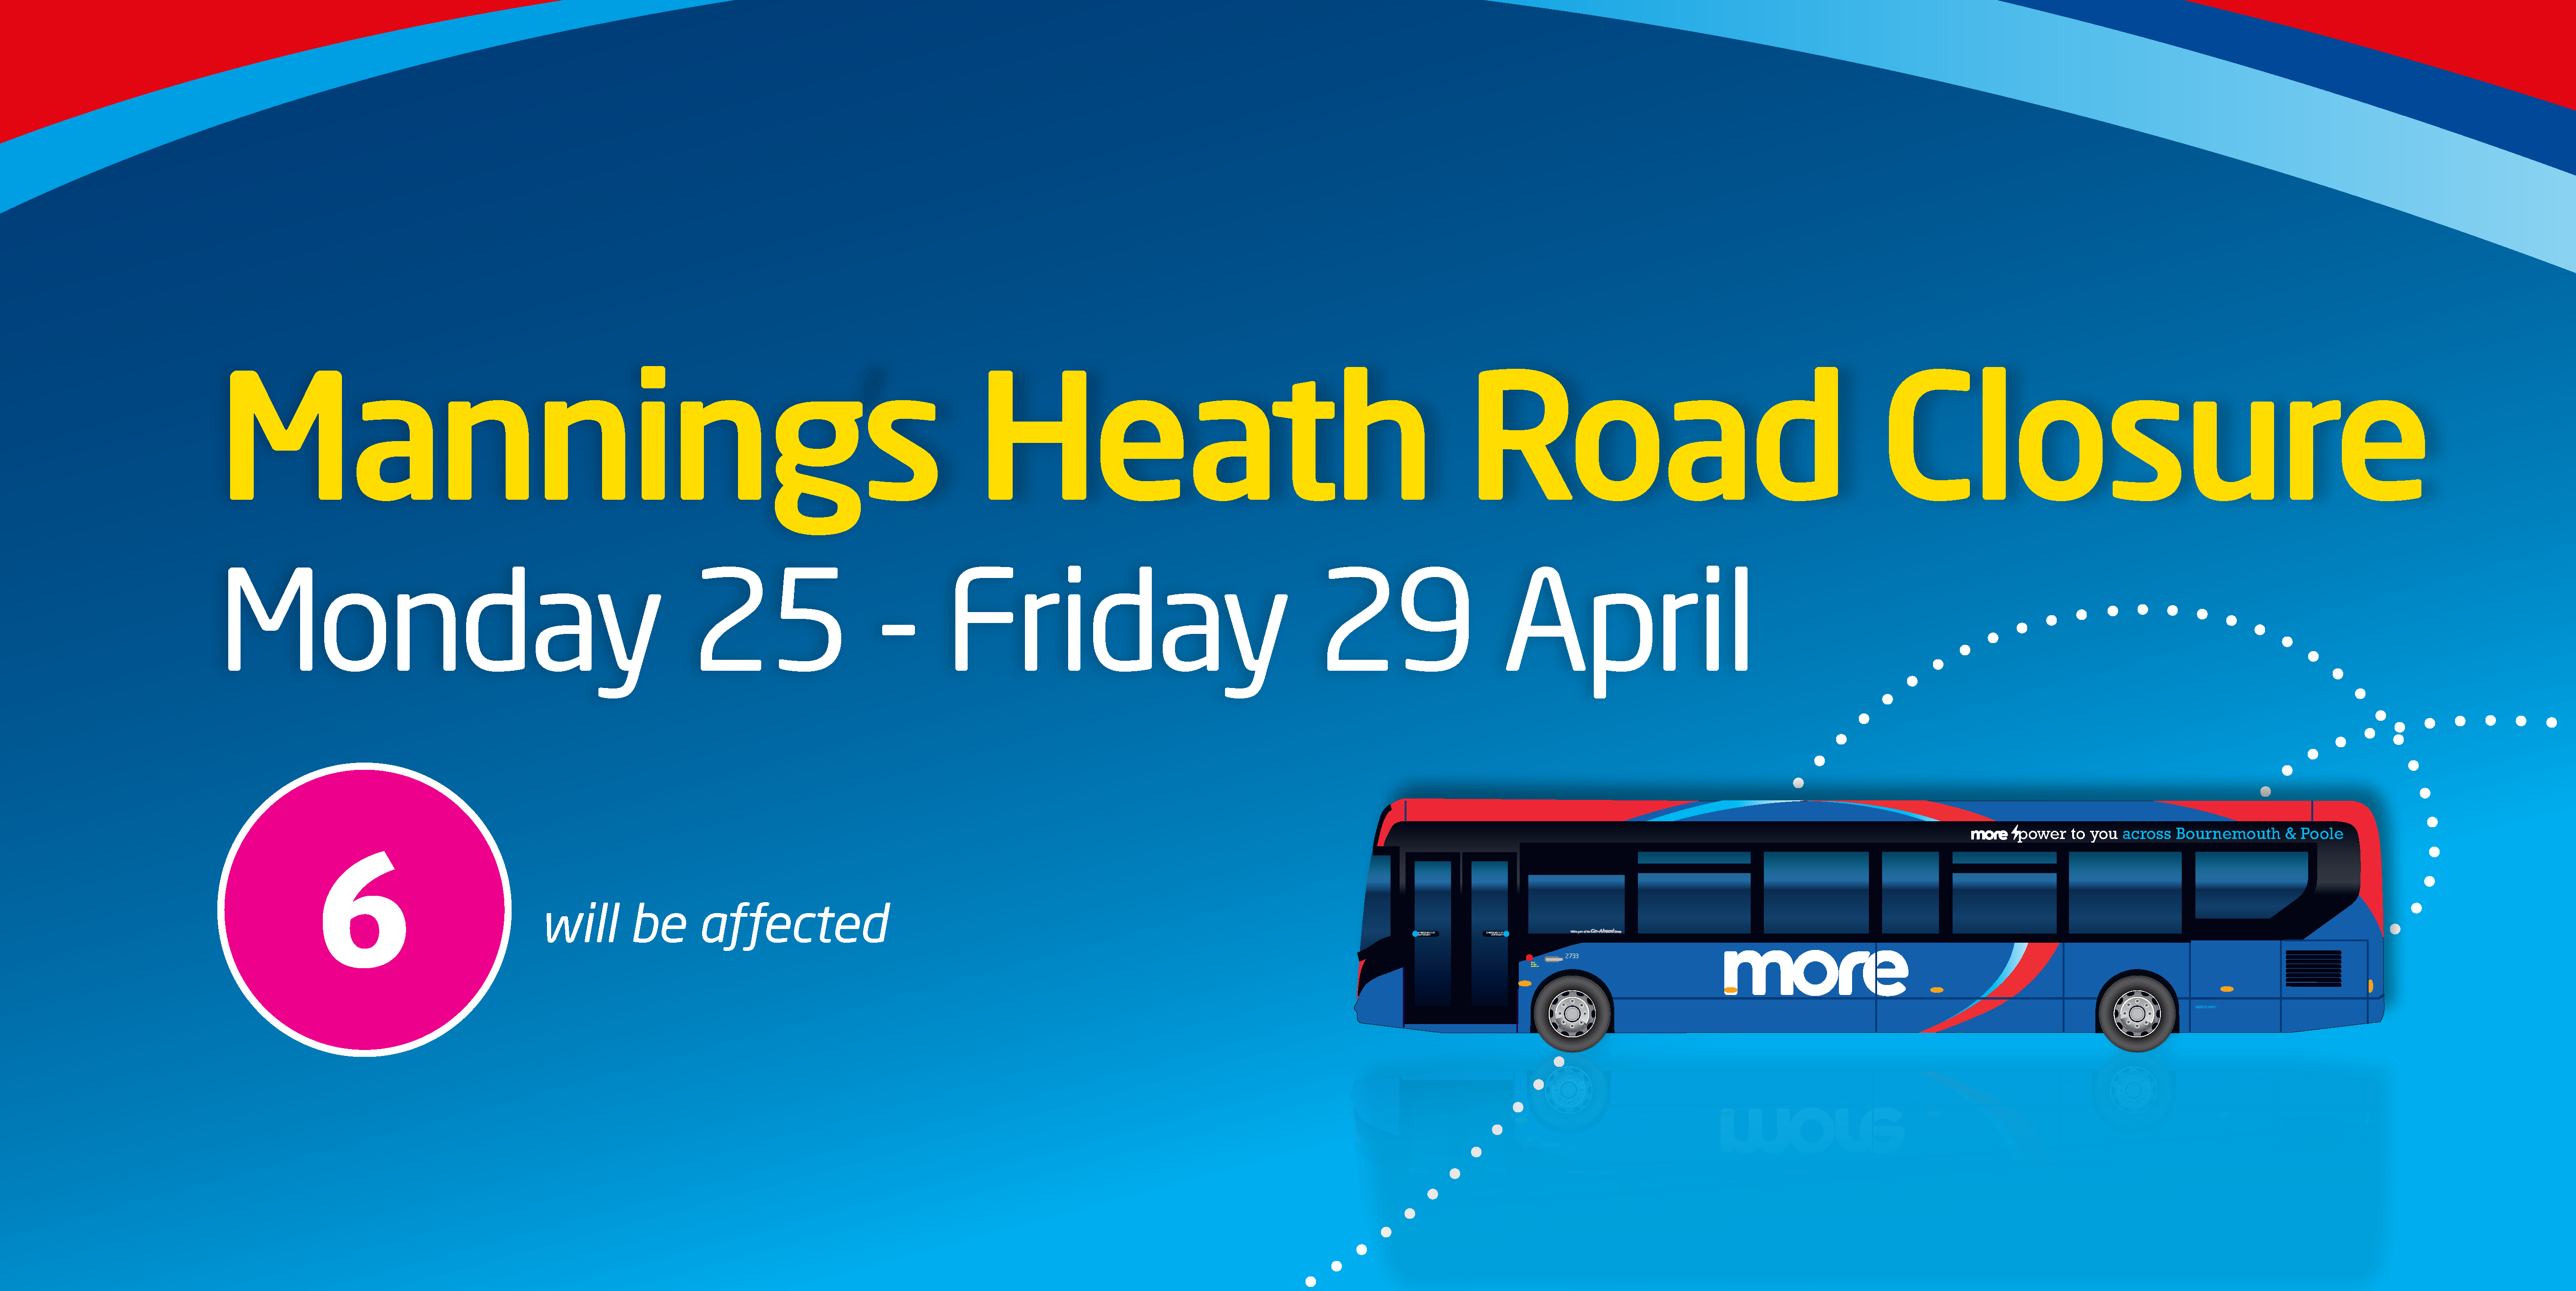 Mannings Heath Road Closure from Monday 25th - Friday 29th April